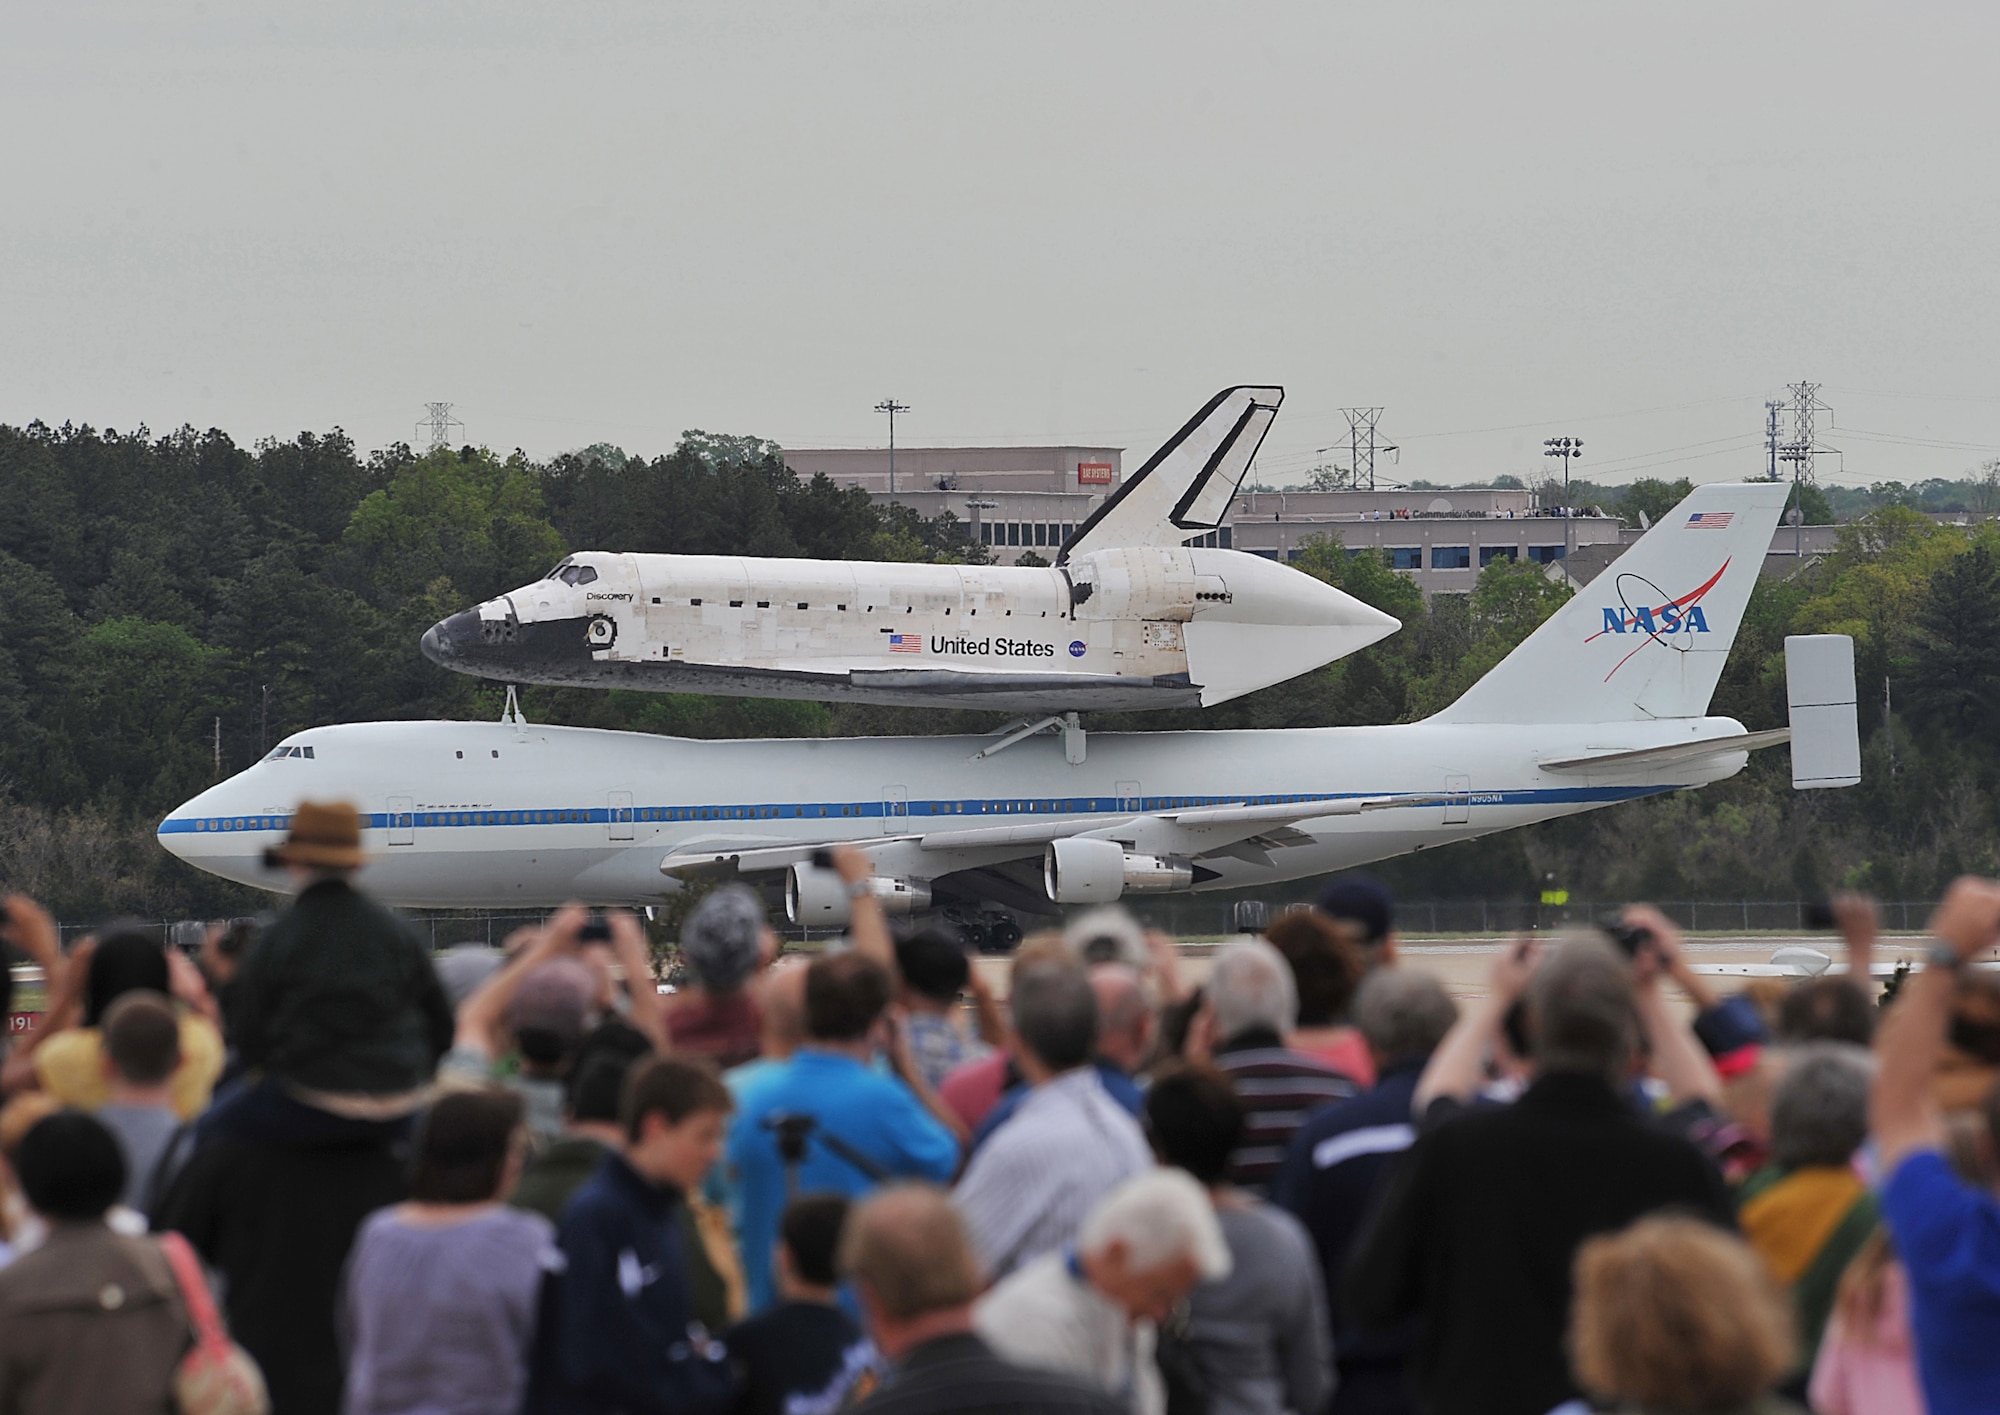 A crowd watches as the space shuttle Discovery, sitting on top of a modified NASA Boeing 747 aircraft, taxis on the runway at Washington Dulles International Airport in Dulles, Va., April 17, 2012. The Discovery made its final voyage to the Smithsonian National Air and Space Museum annex in Virginia. (U.S. Air Force photo by Val Gempis)